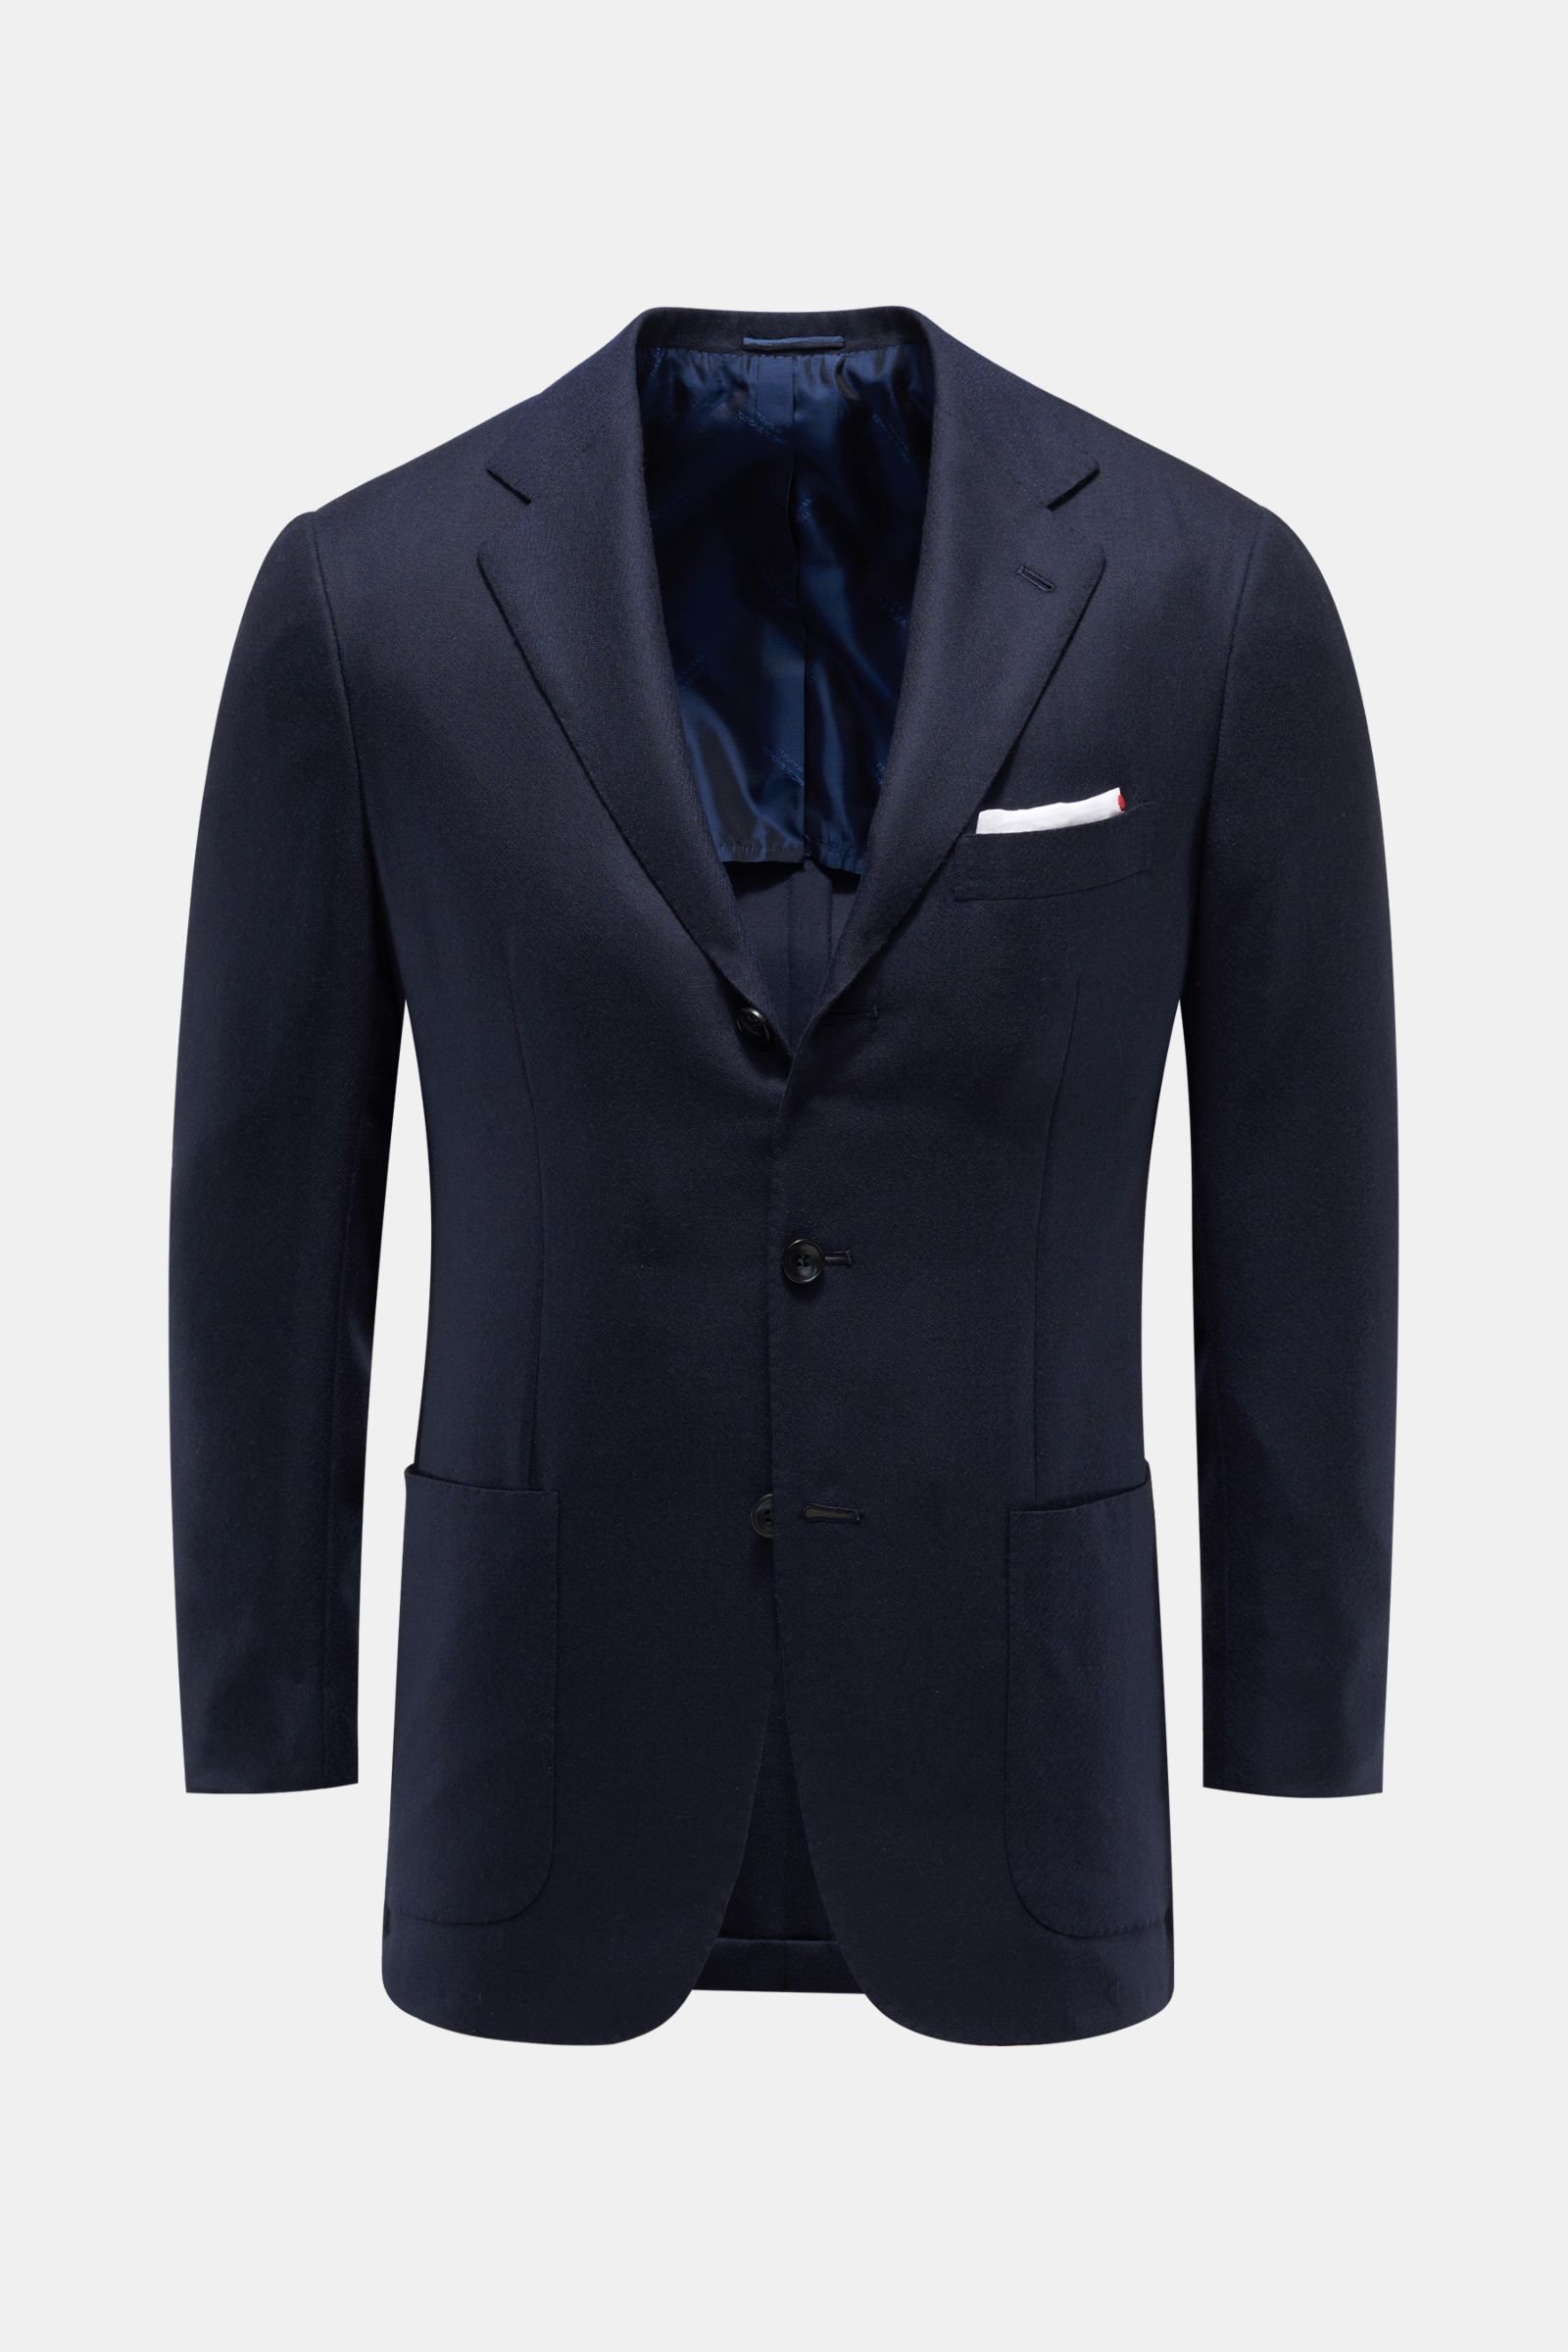 Cashmere smart-casual jacket navy